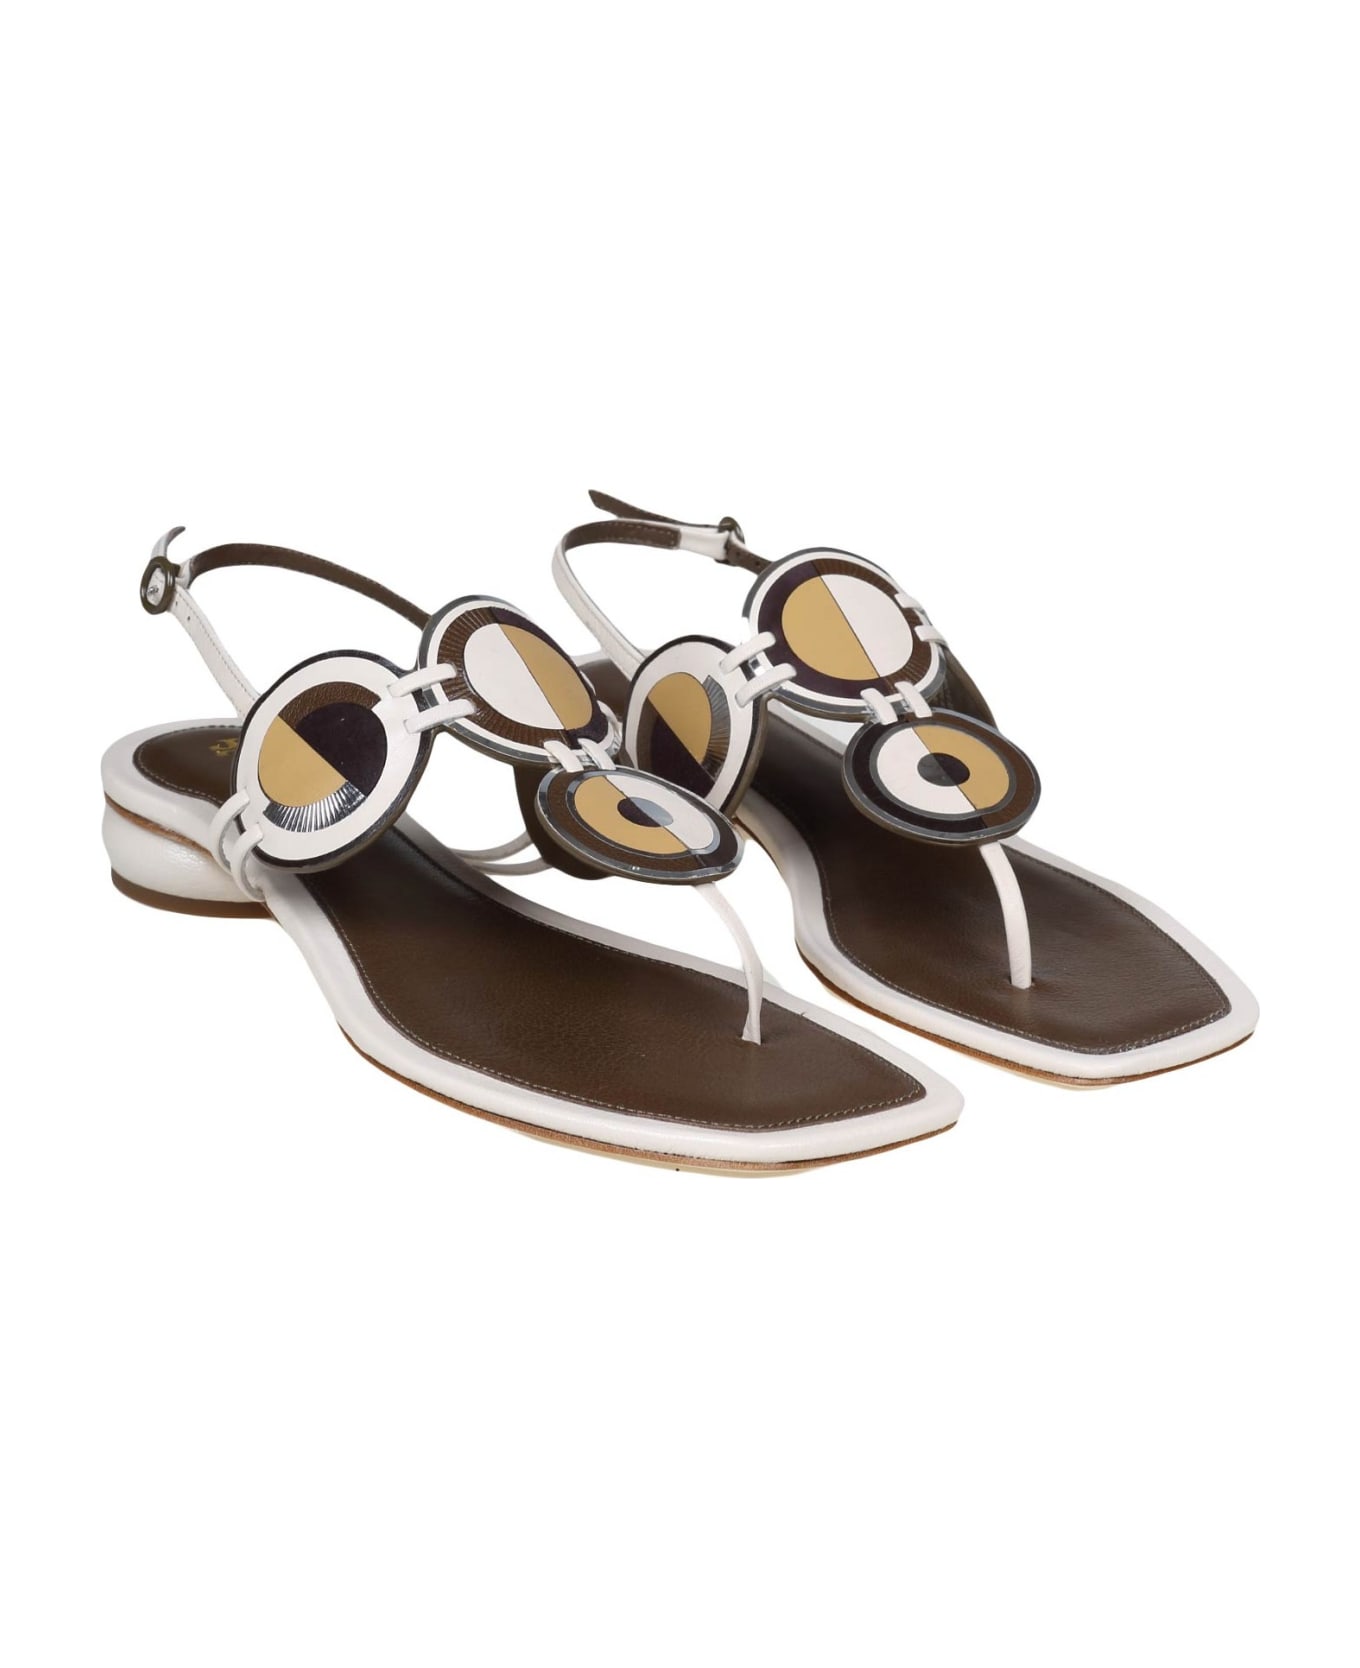 Tory Burch Leather Thong Sandal With Applied Discs - Cream